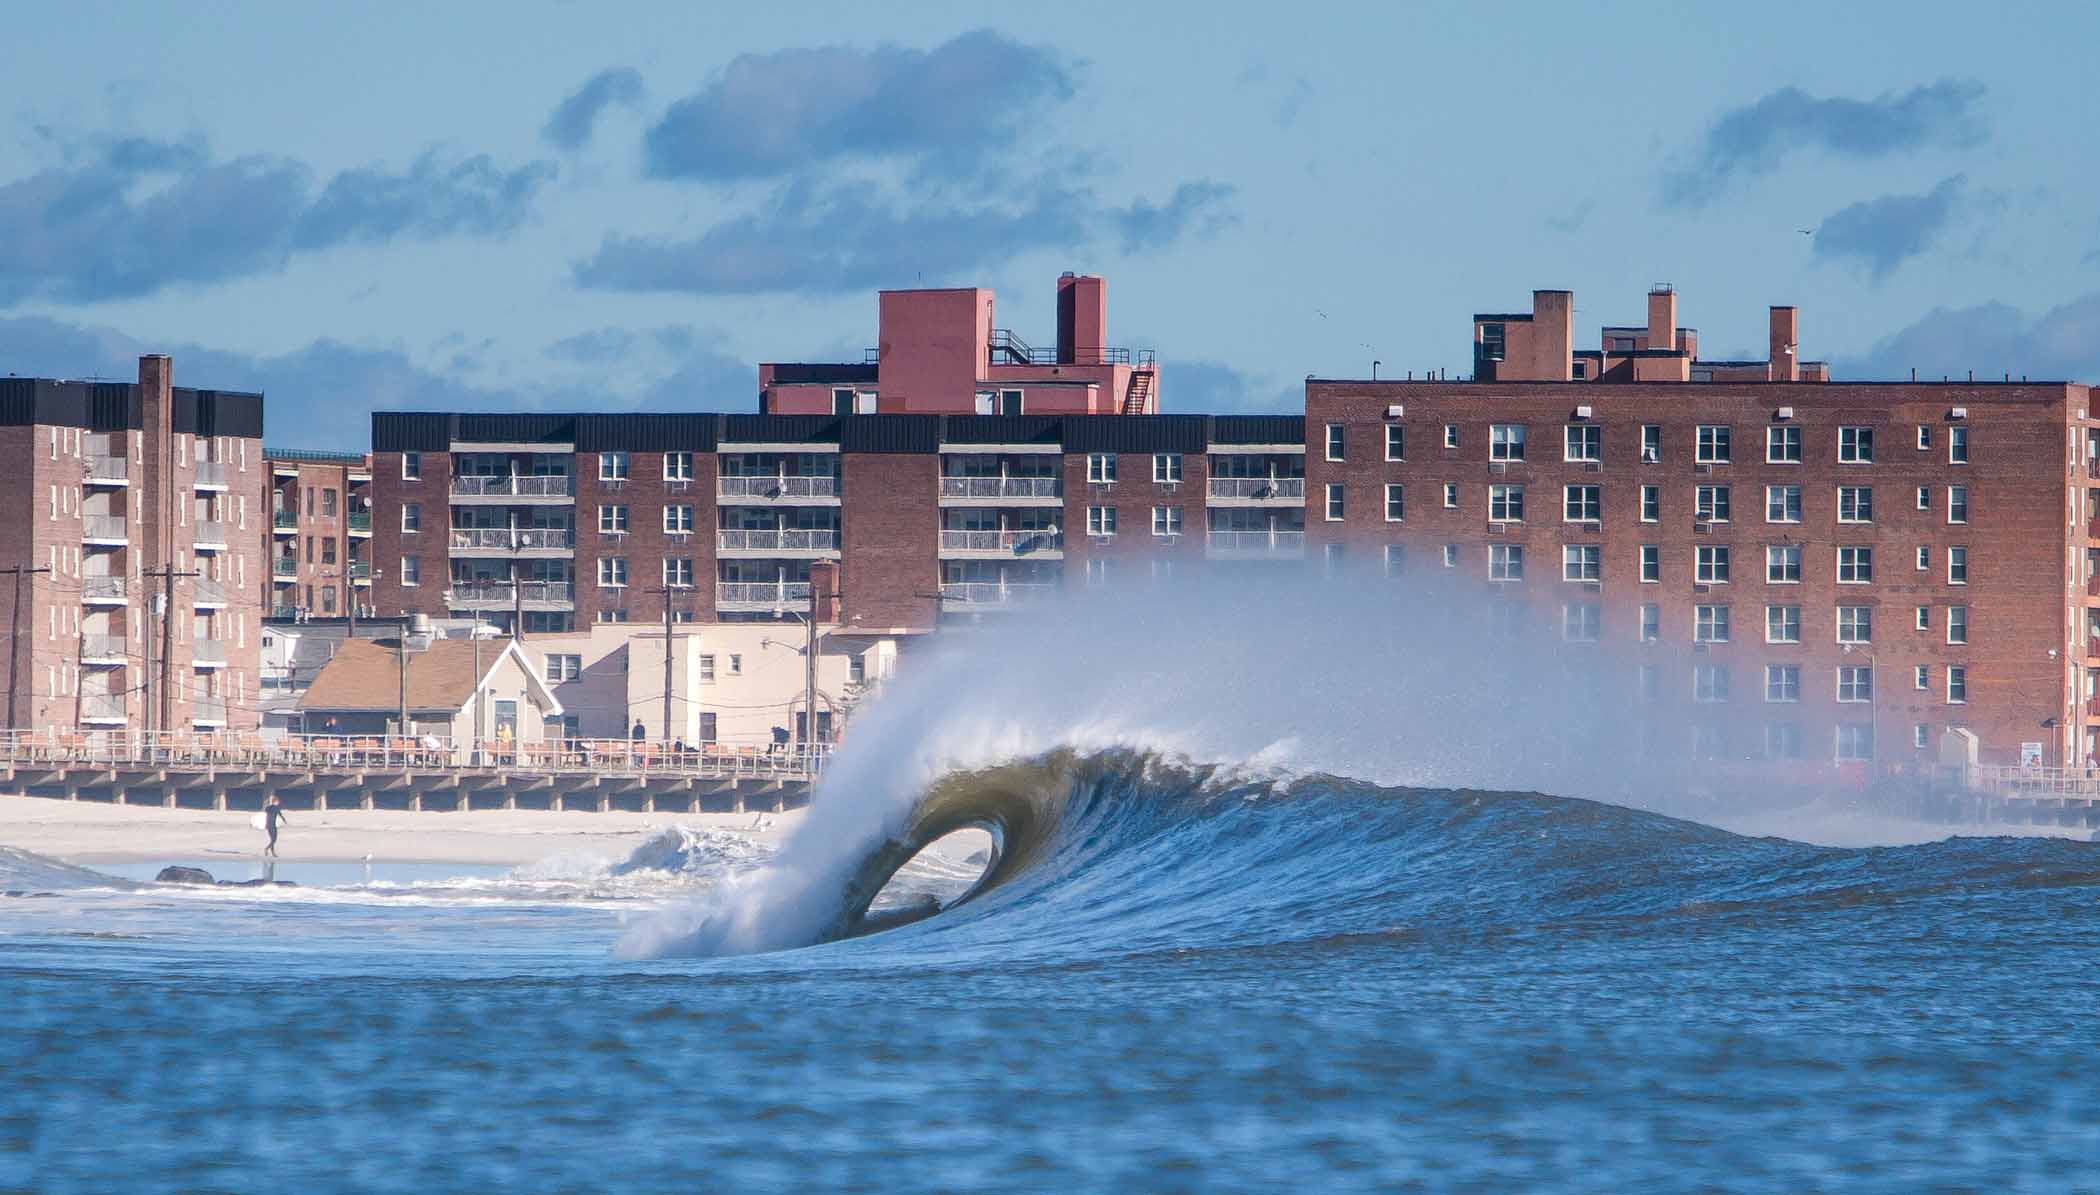 Probably my most “recognized” image. Just a good day in Long Beach, NY. Photo: Nelson.